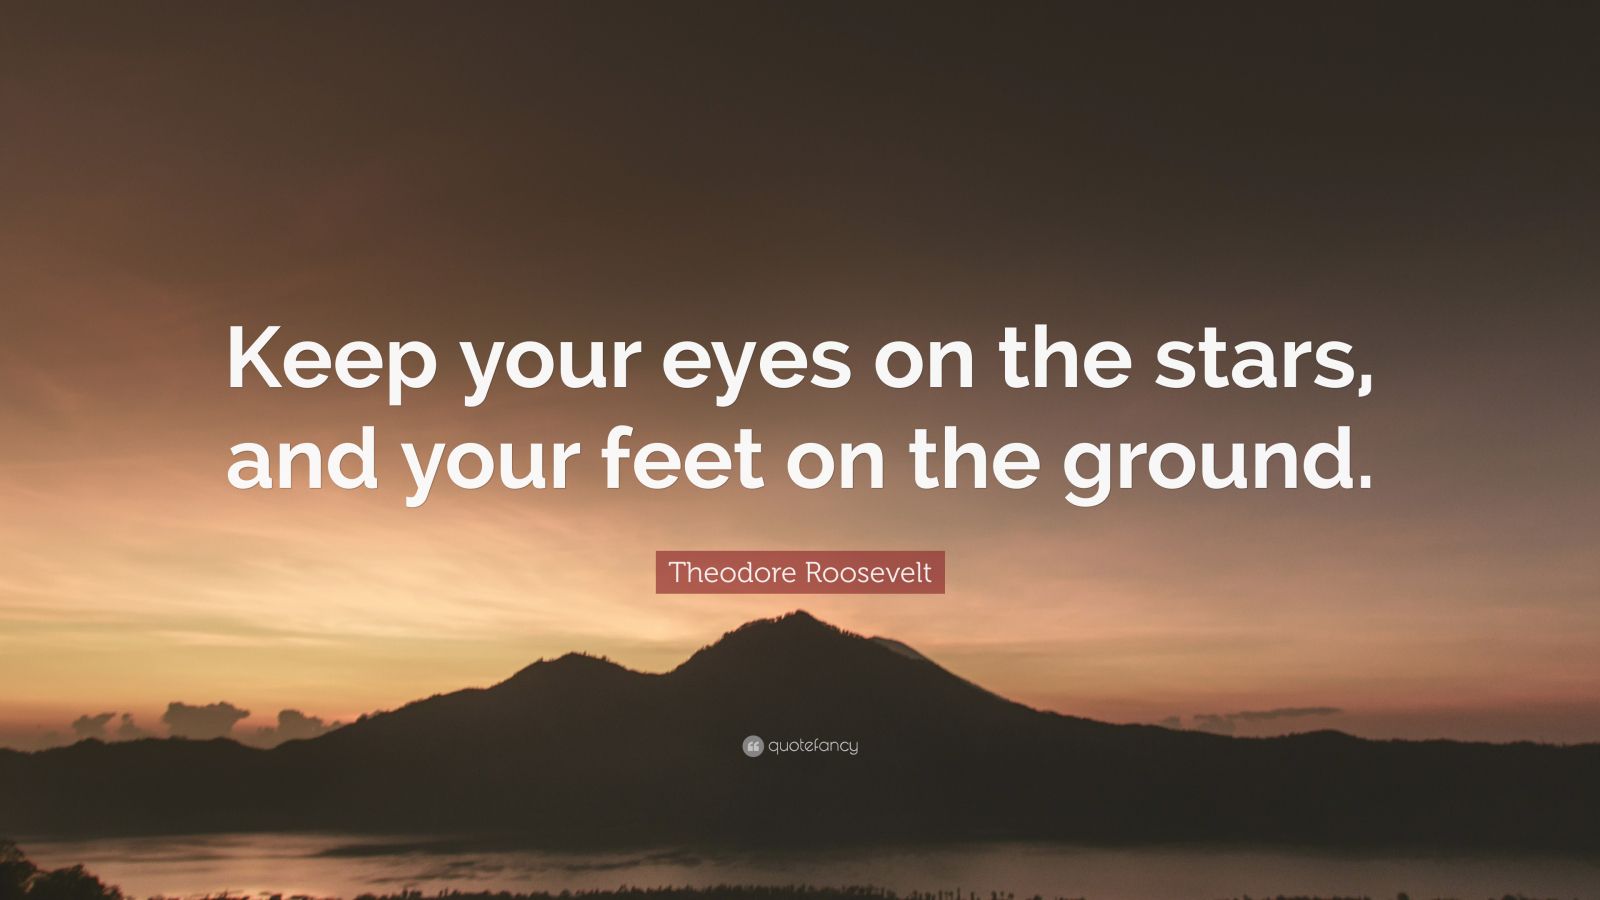 Theodore Roosevelt Quote: “Keep your eyes on the stars, and your feet